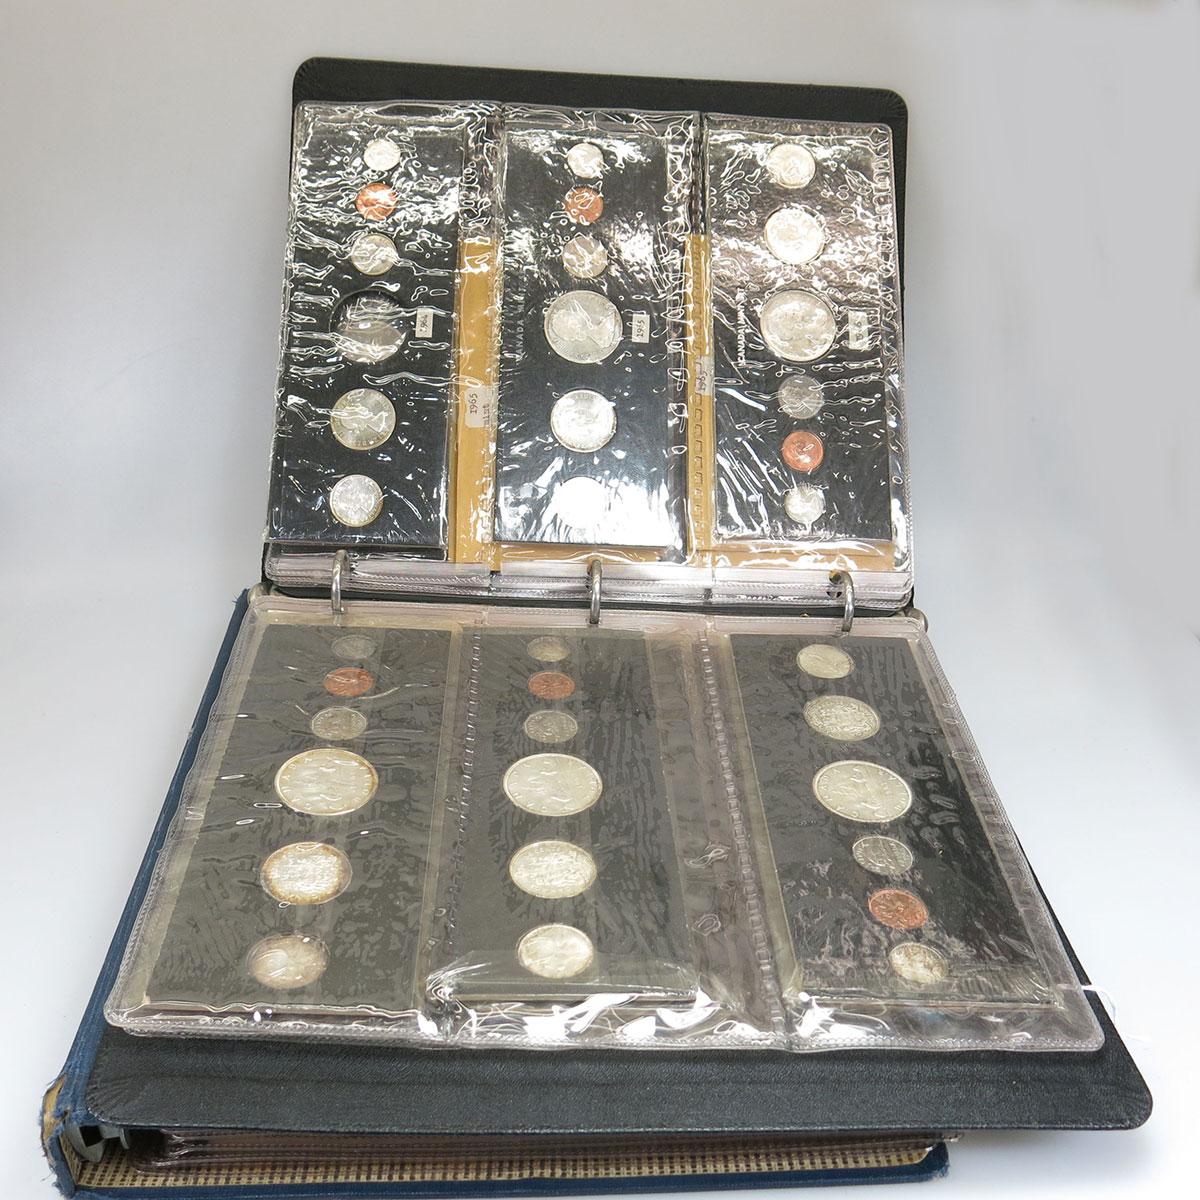 Quantity Of Uncirculated And Partial Canadian Coin Sets